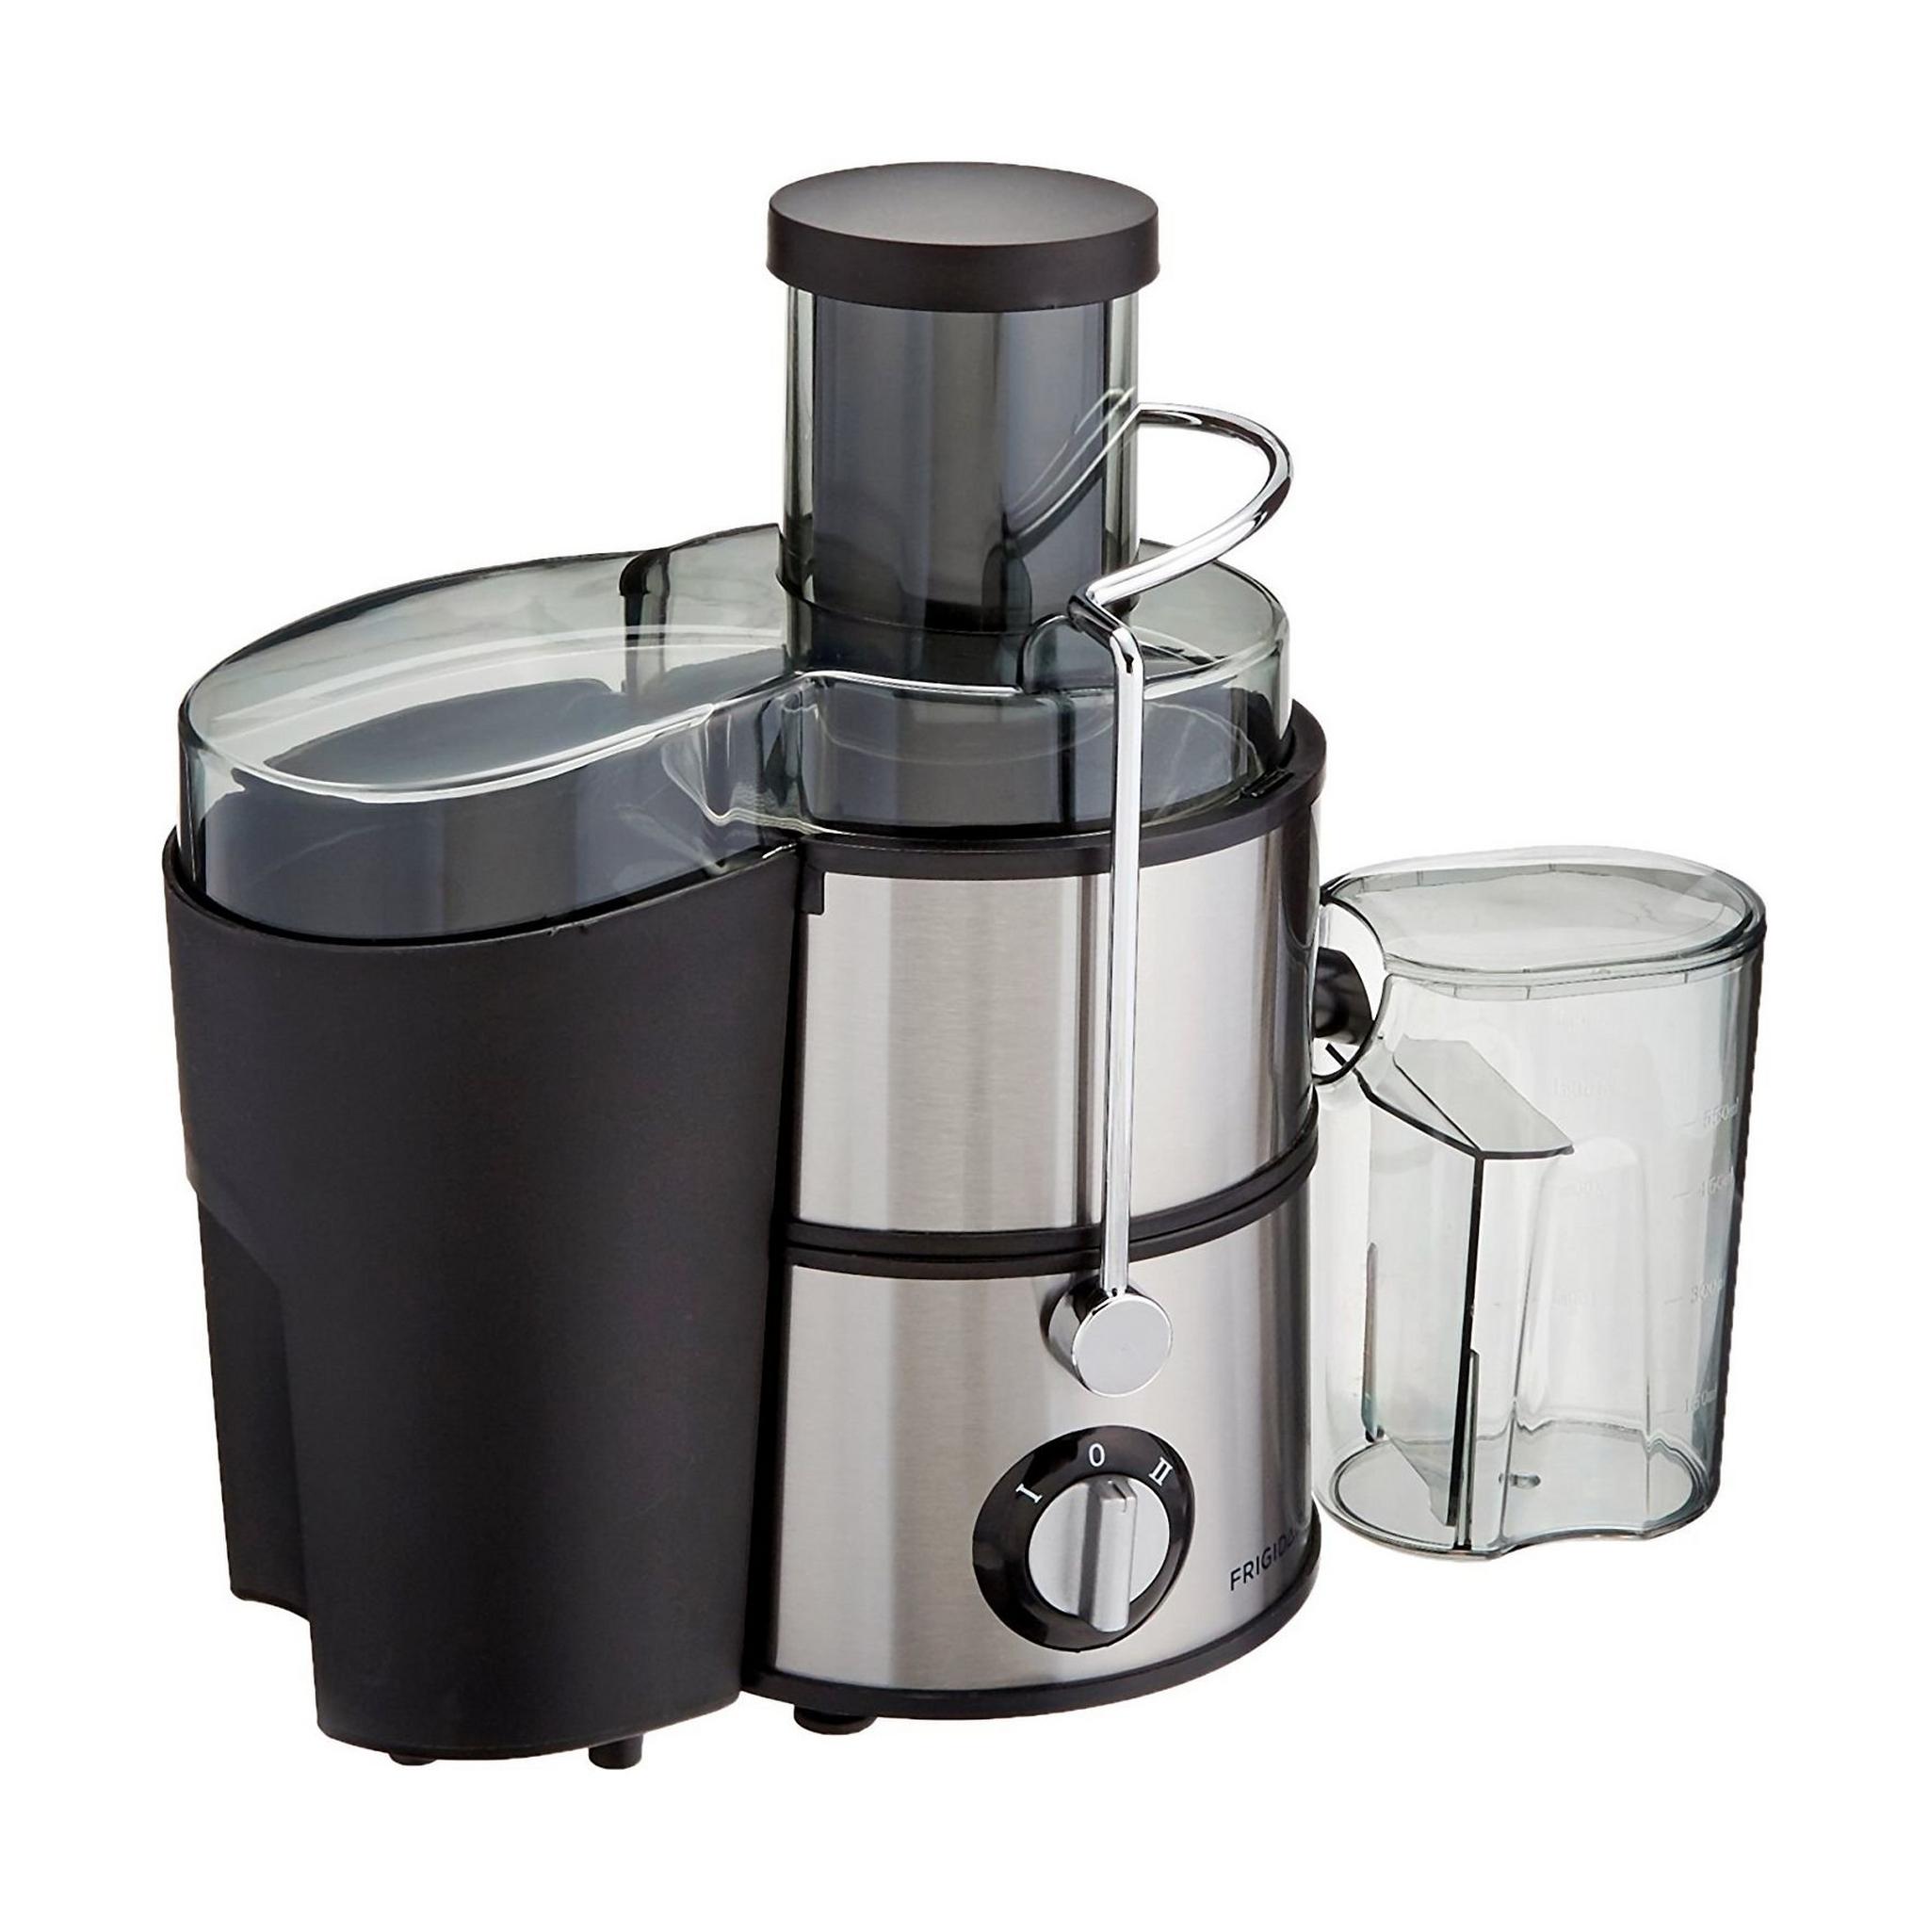 Frigidaire Juicer Extractor with Blender, 400W, 1.5L, FD5181 - Stainless Steel